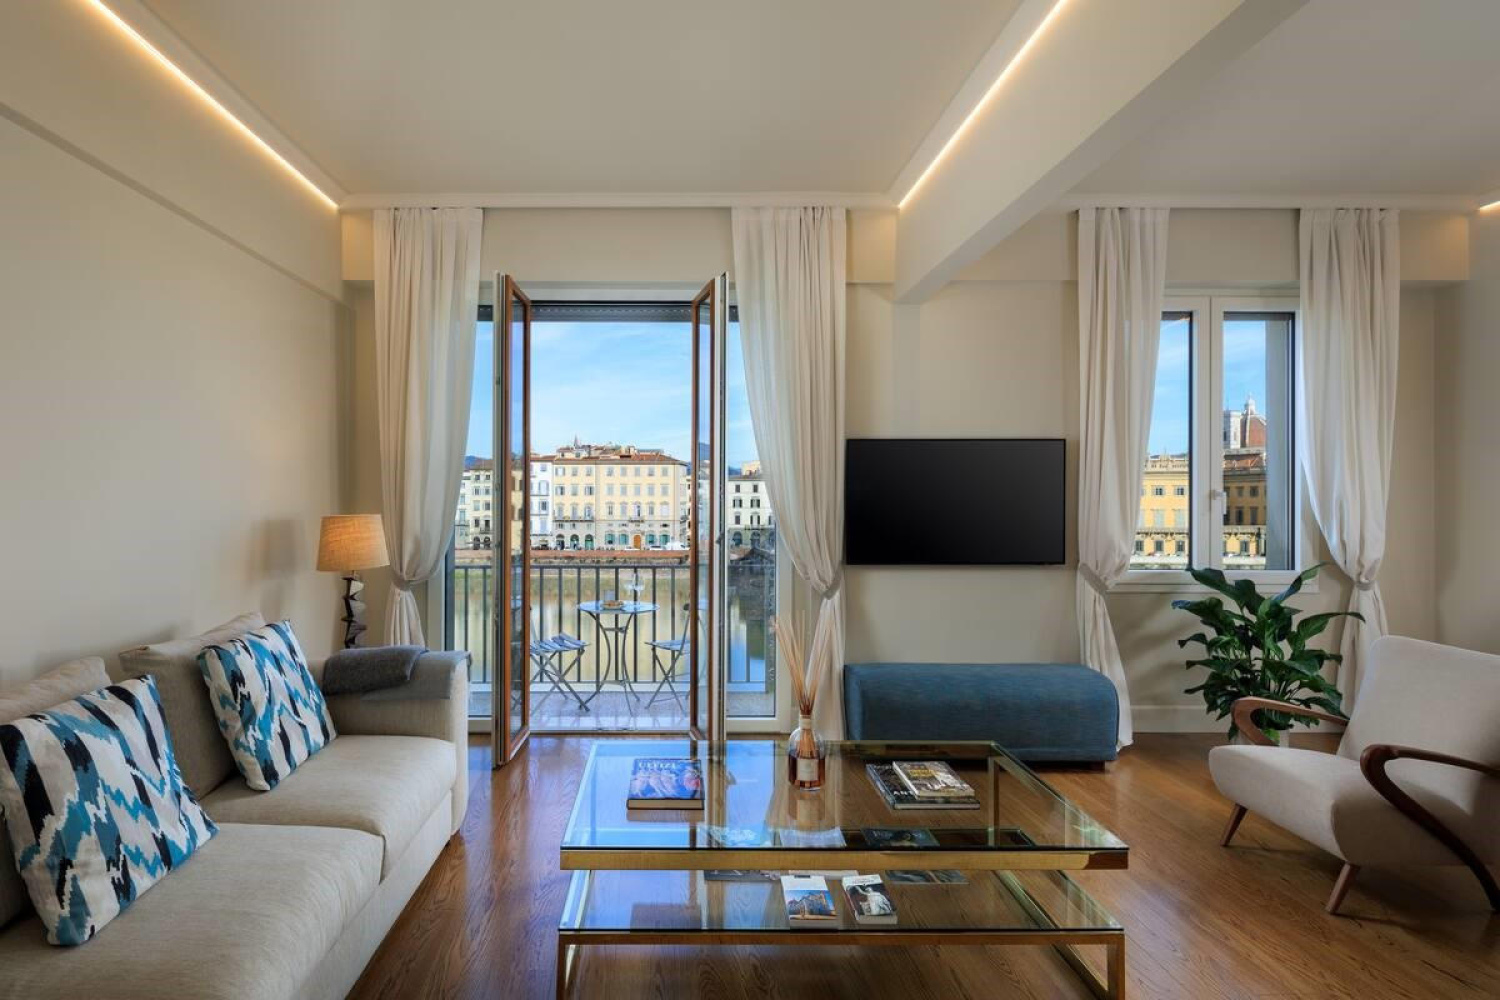 APPARTEMENT LUNGARNO SODERINI À FLORENCE - IBFOR - Your design shop